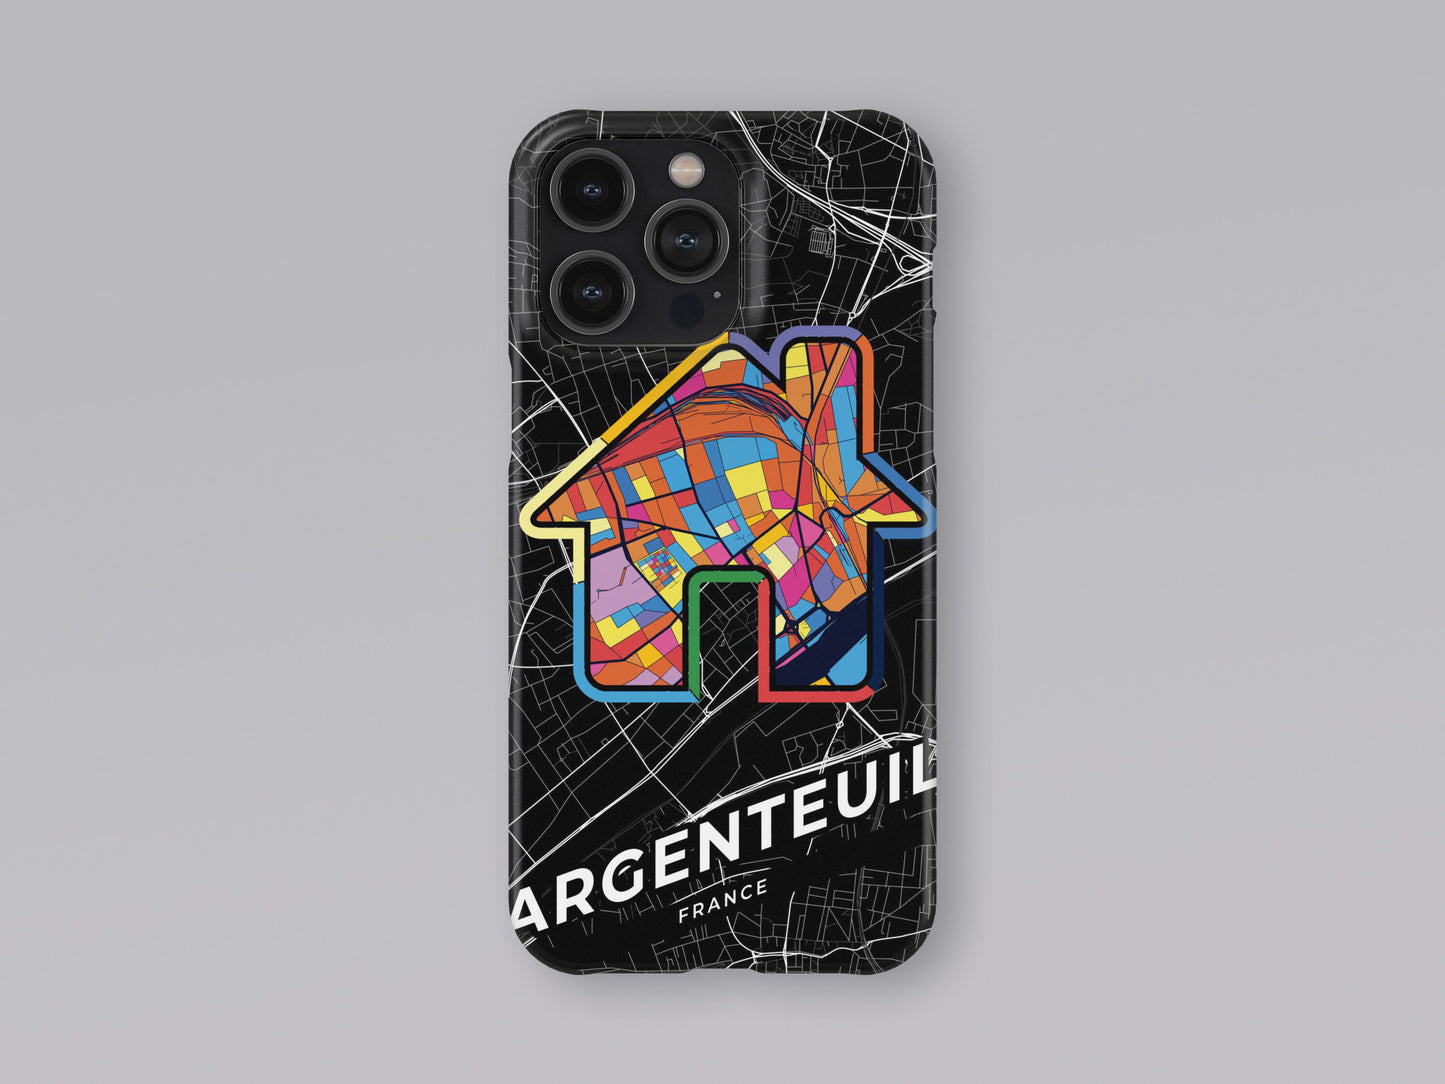 Argenteuil France slim phone case with colorful icon. Birthday, wedding or housewarming gift. Couple match cases. 3